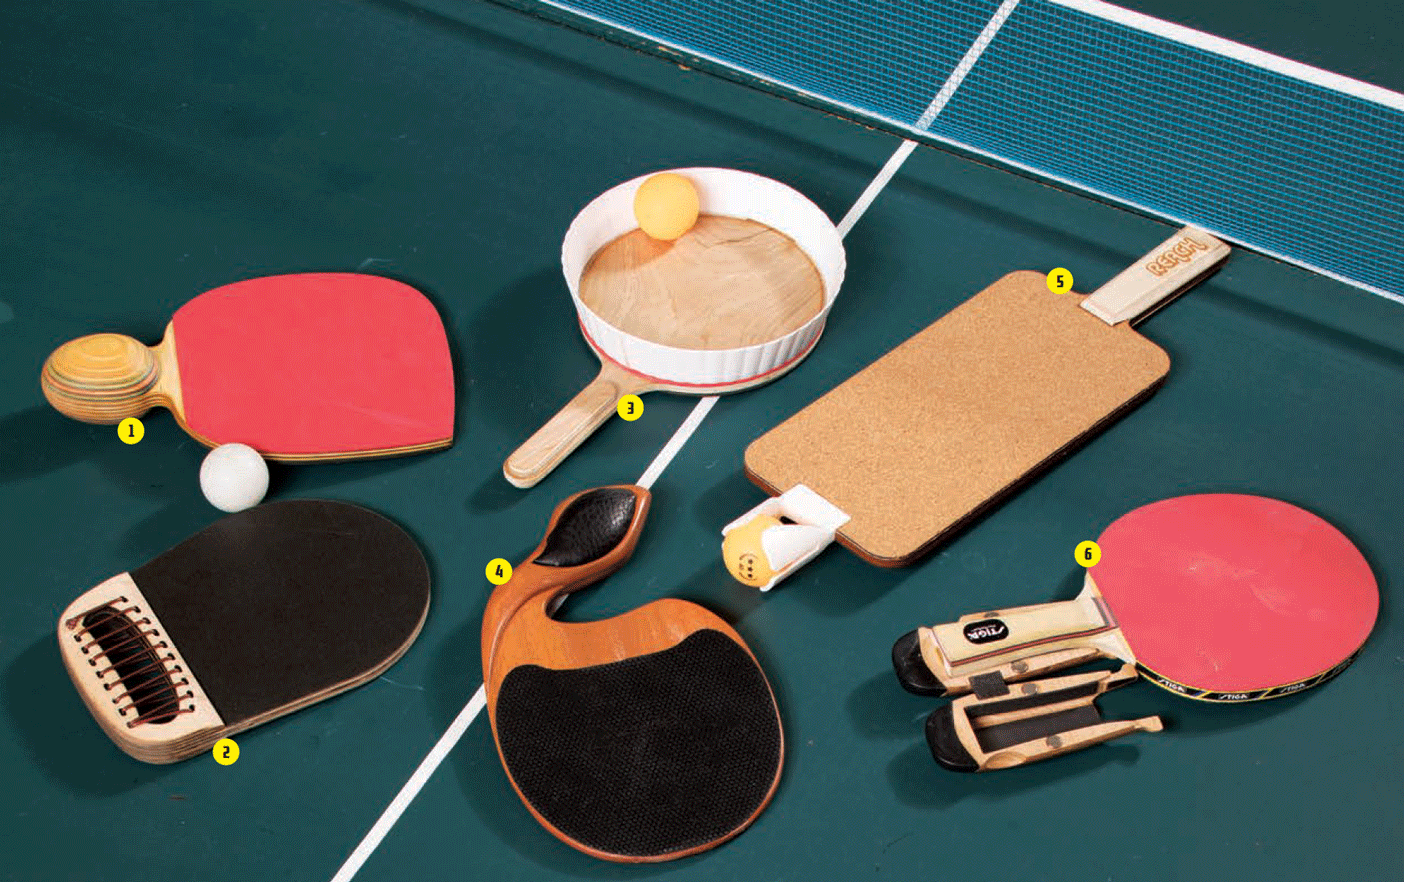 Why not treat yourself to some Louis Vuitton ping-pong bats?